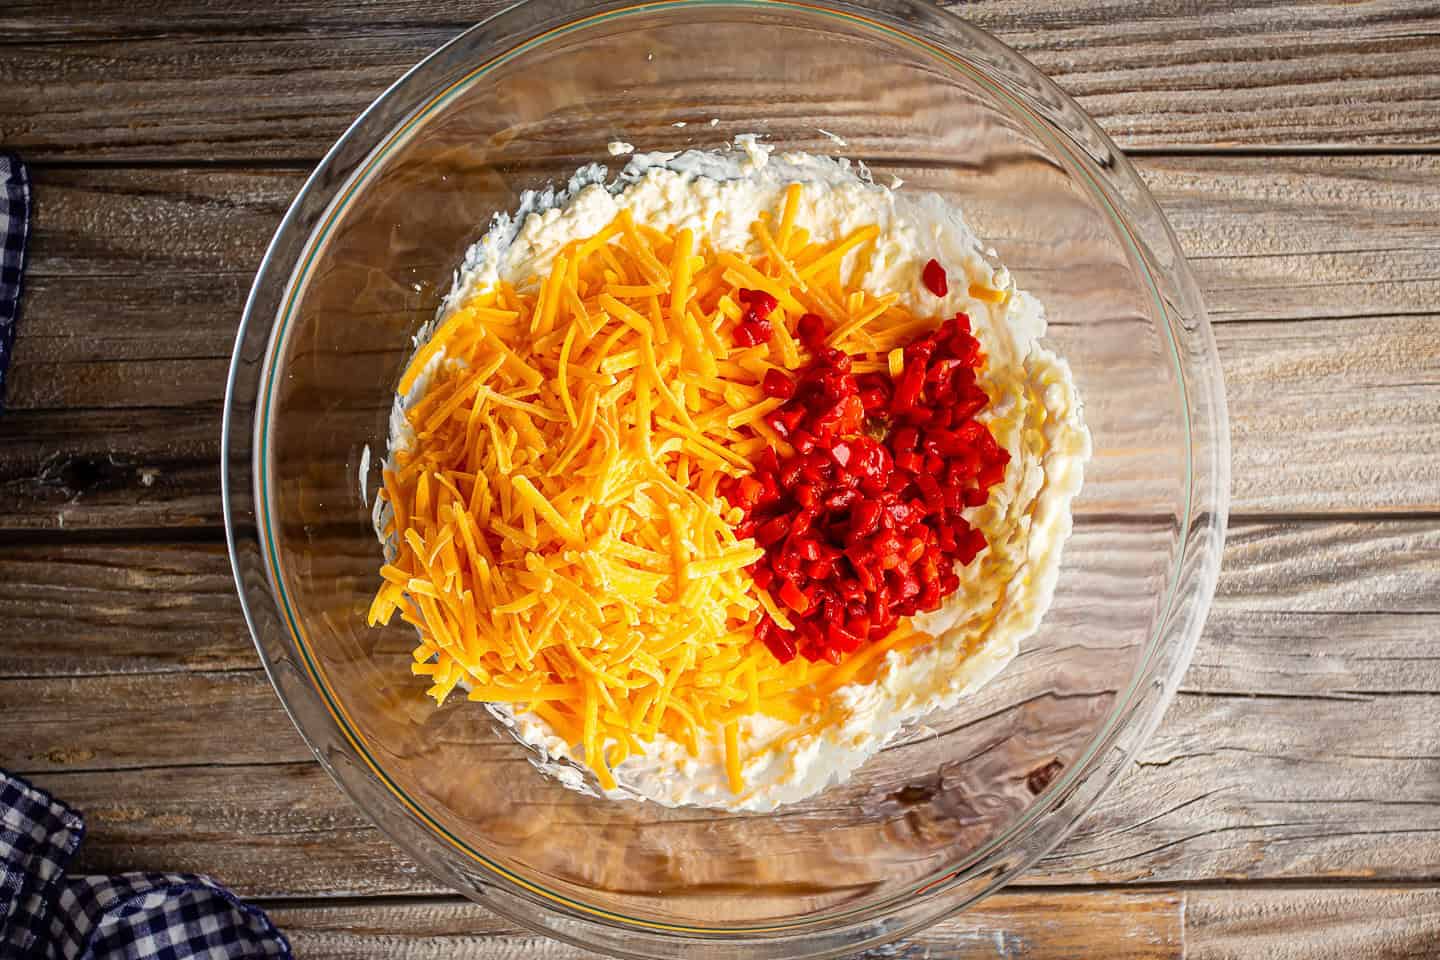 Adding shredded cheddar cheese and diced pimentos to base.